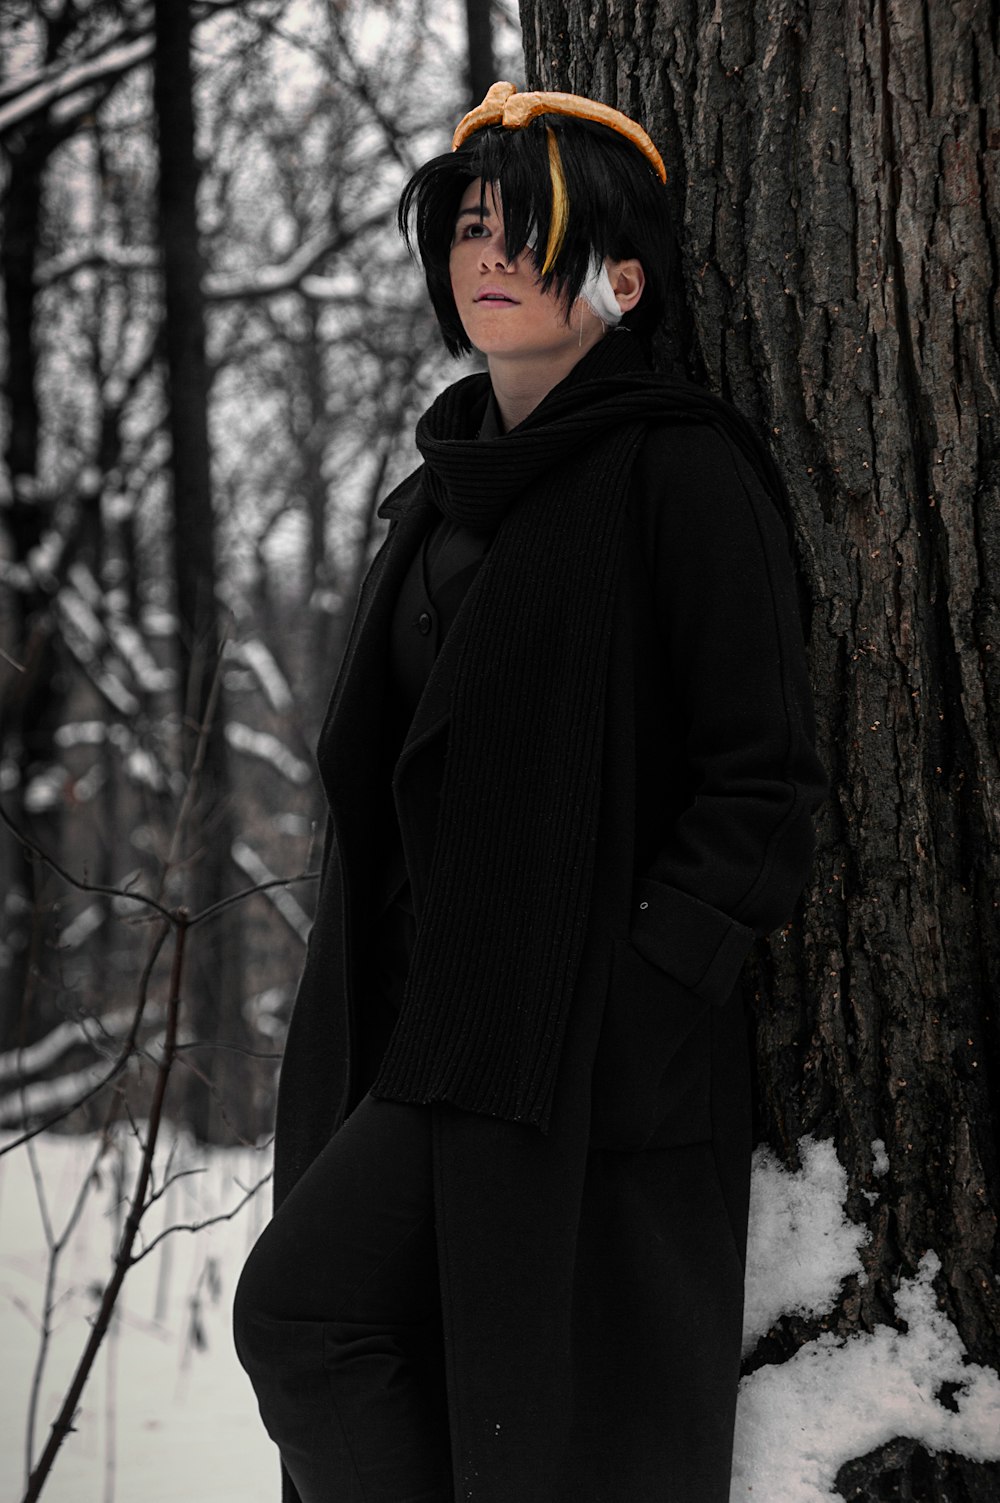 a woman standing next to a tree in the snow